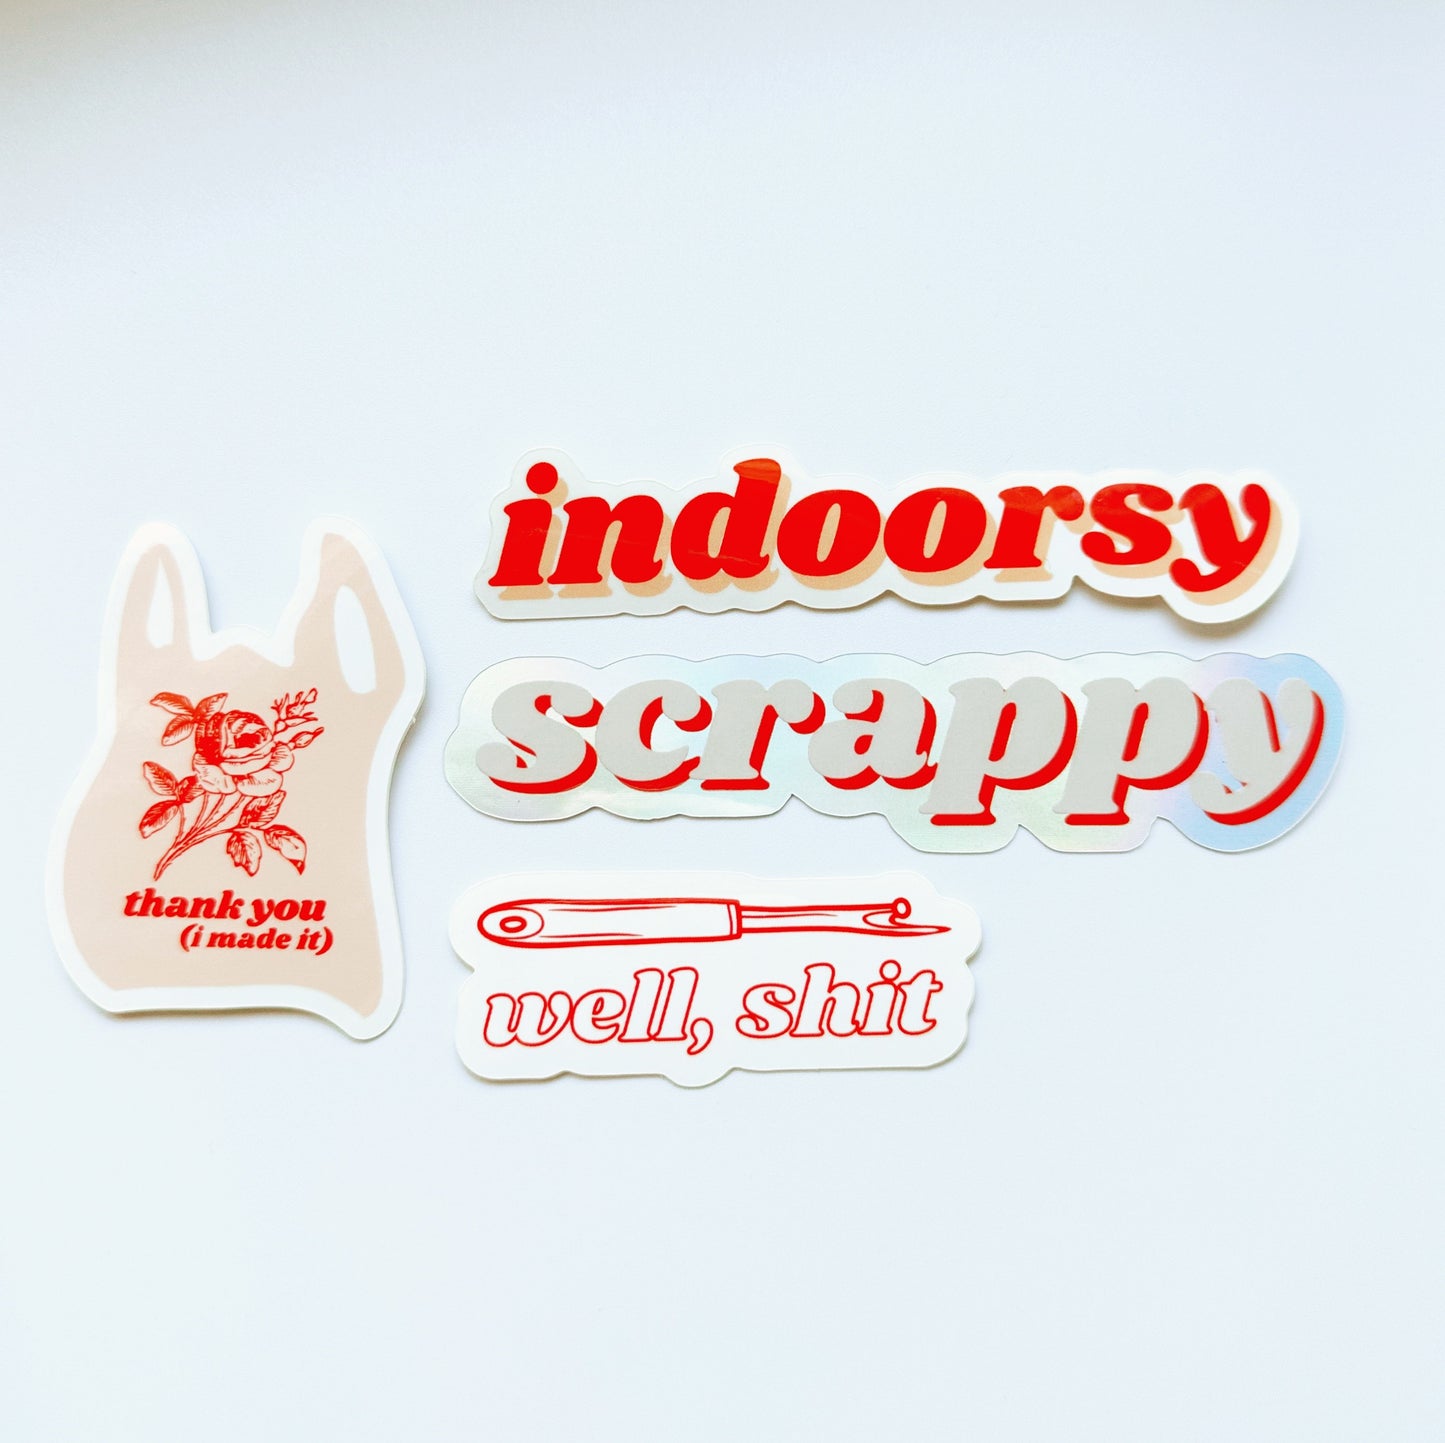 Quilting sewing vinyl sticker pack, scrappy, indoorsy, seam ripper, thank you bag